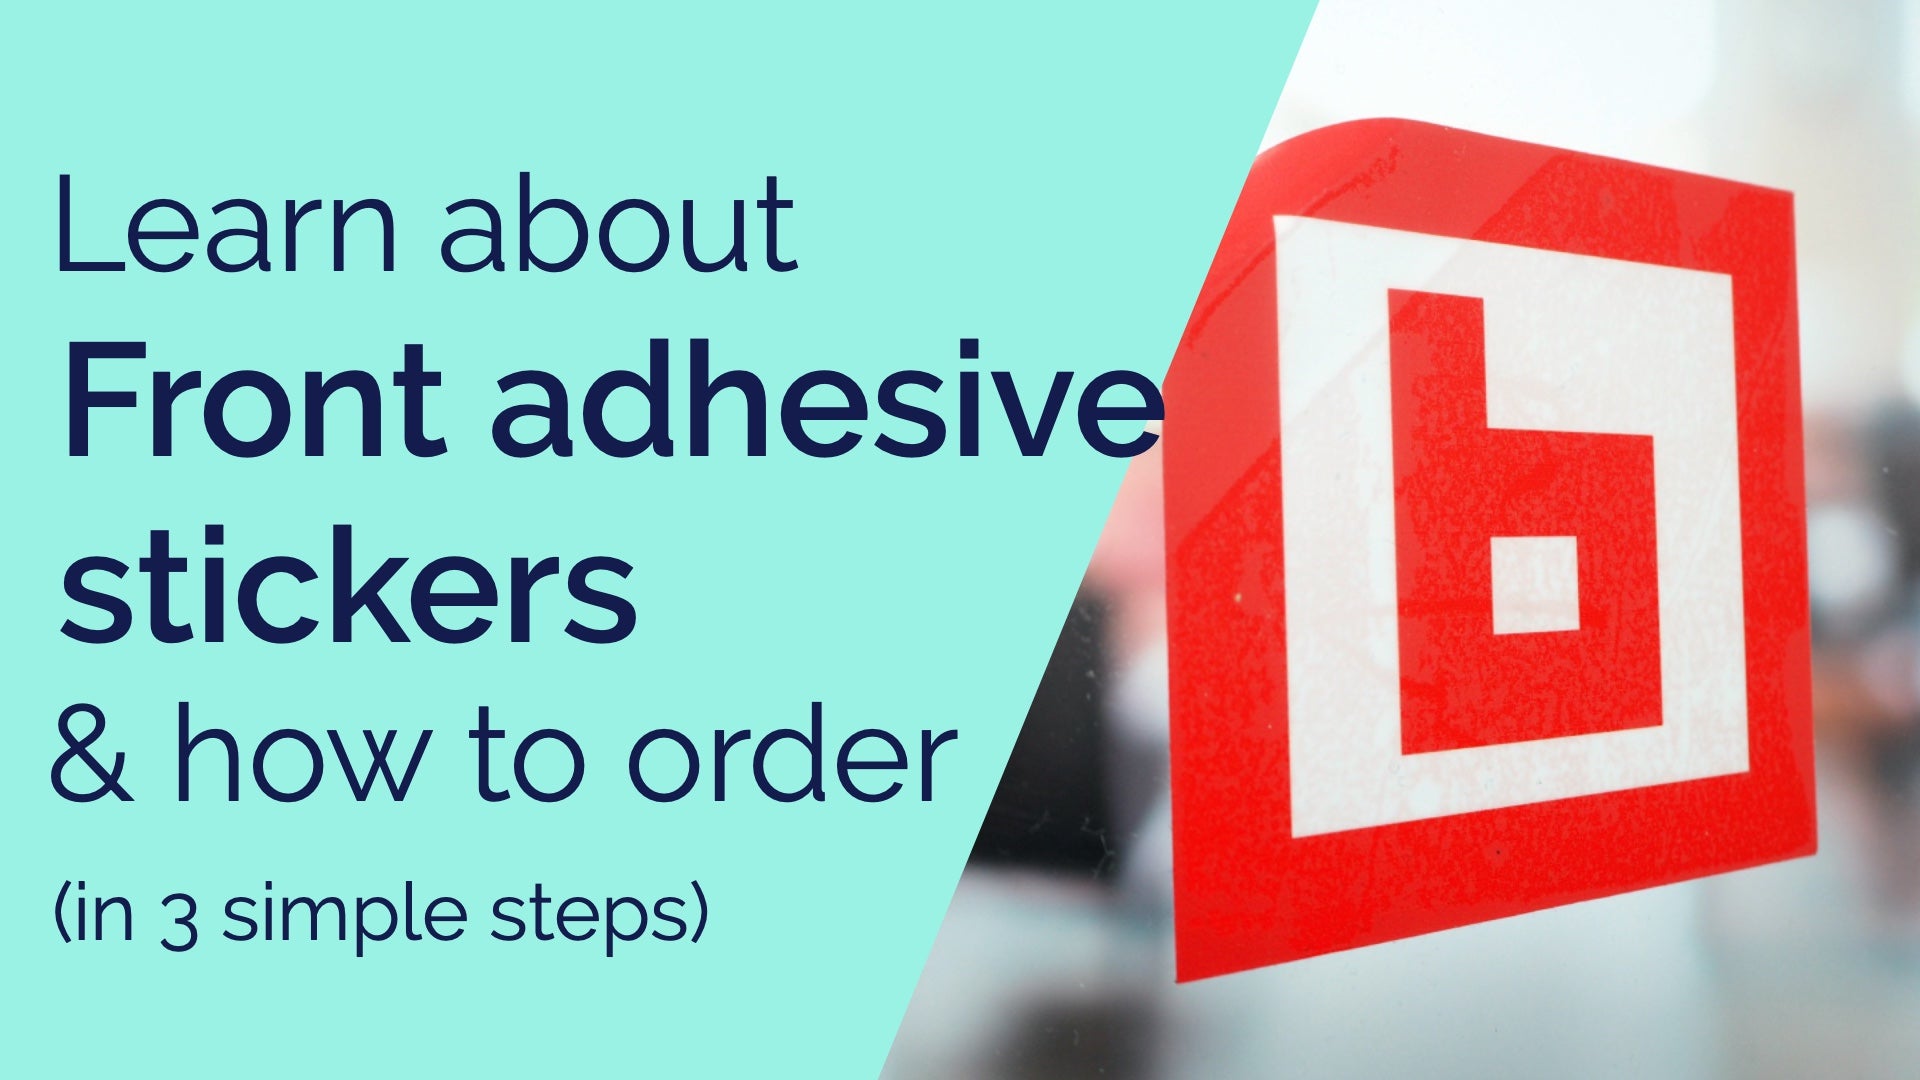 Video laden: A video explaining what front adhesive stickers are and how to order them